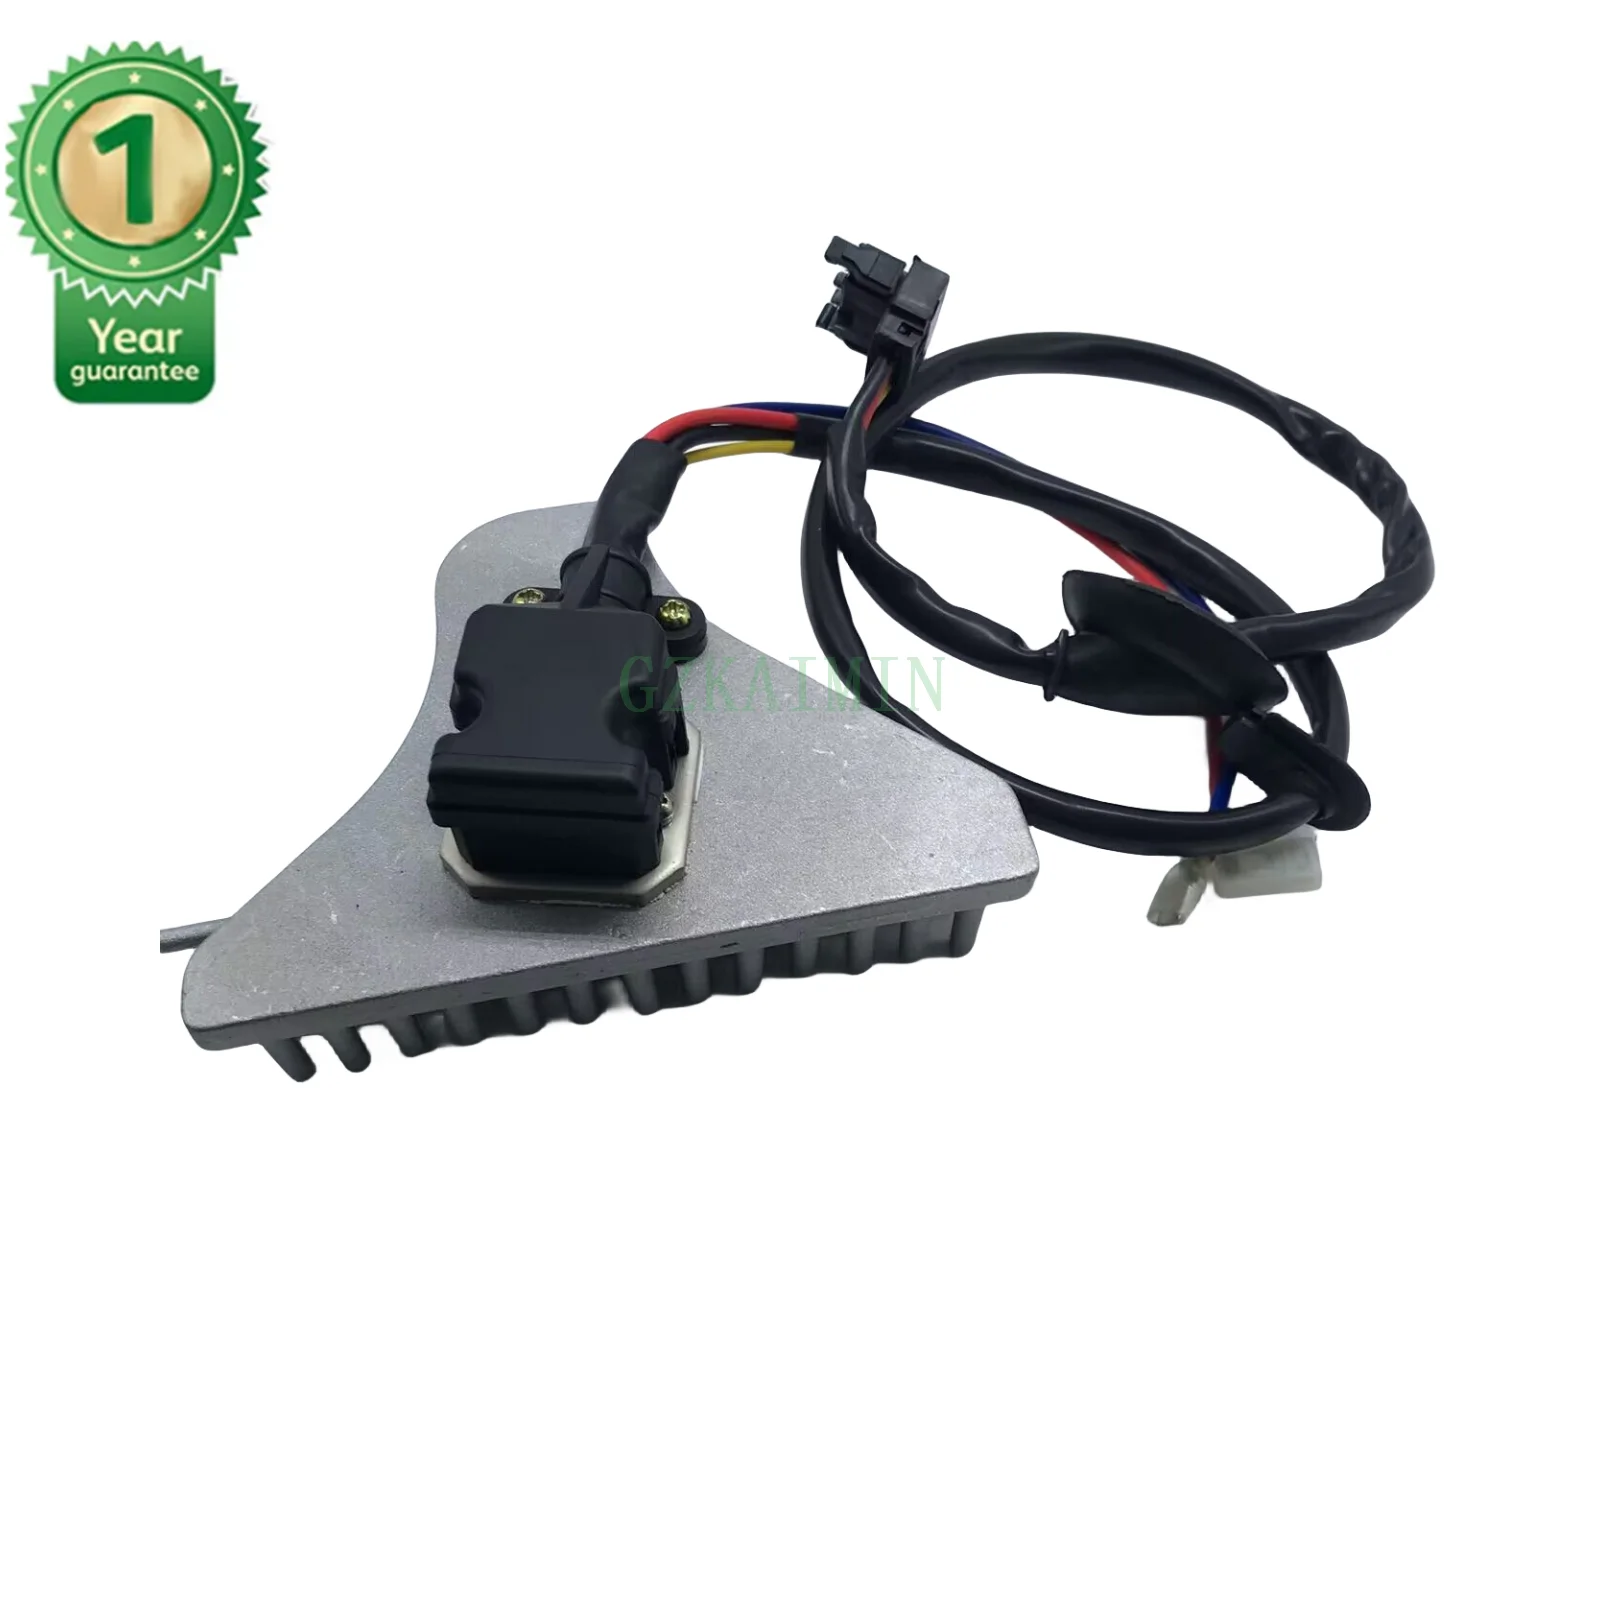 

Air conditioner blower motor resistor OEM 1248202710 suitable for Mercedes Benz